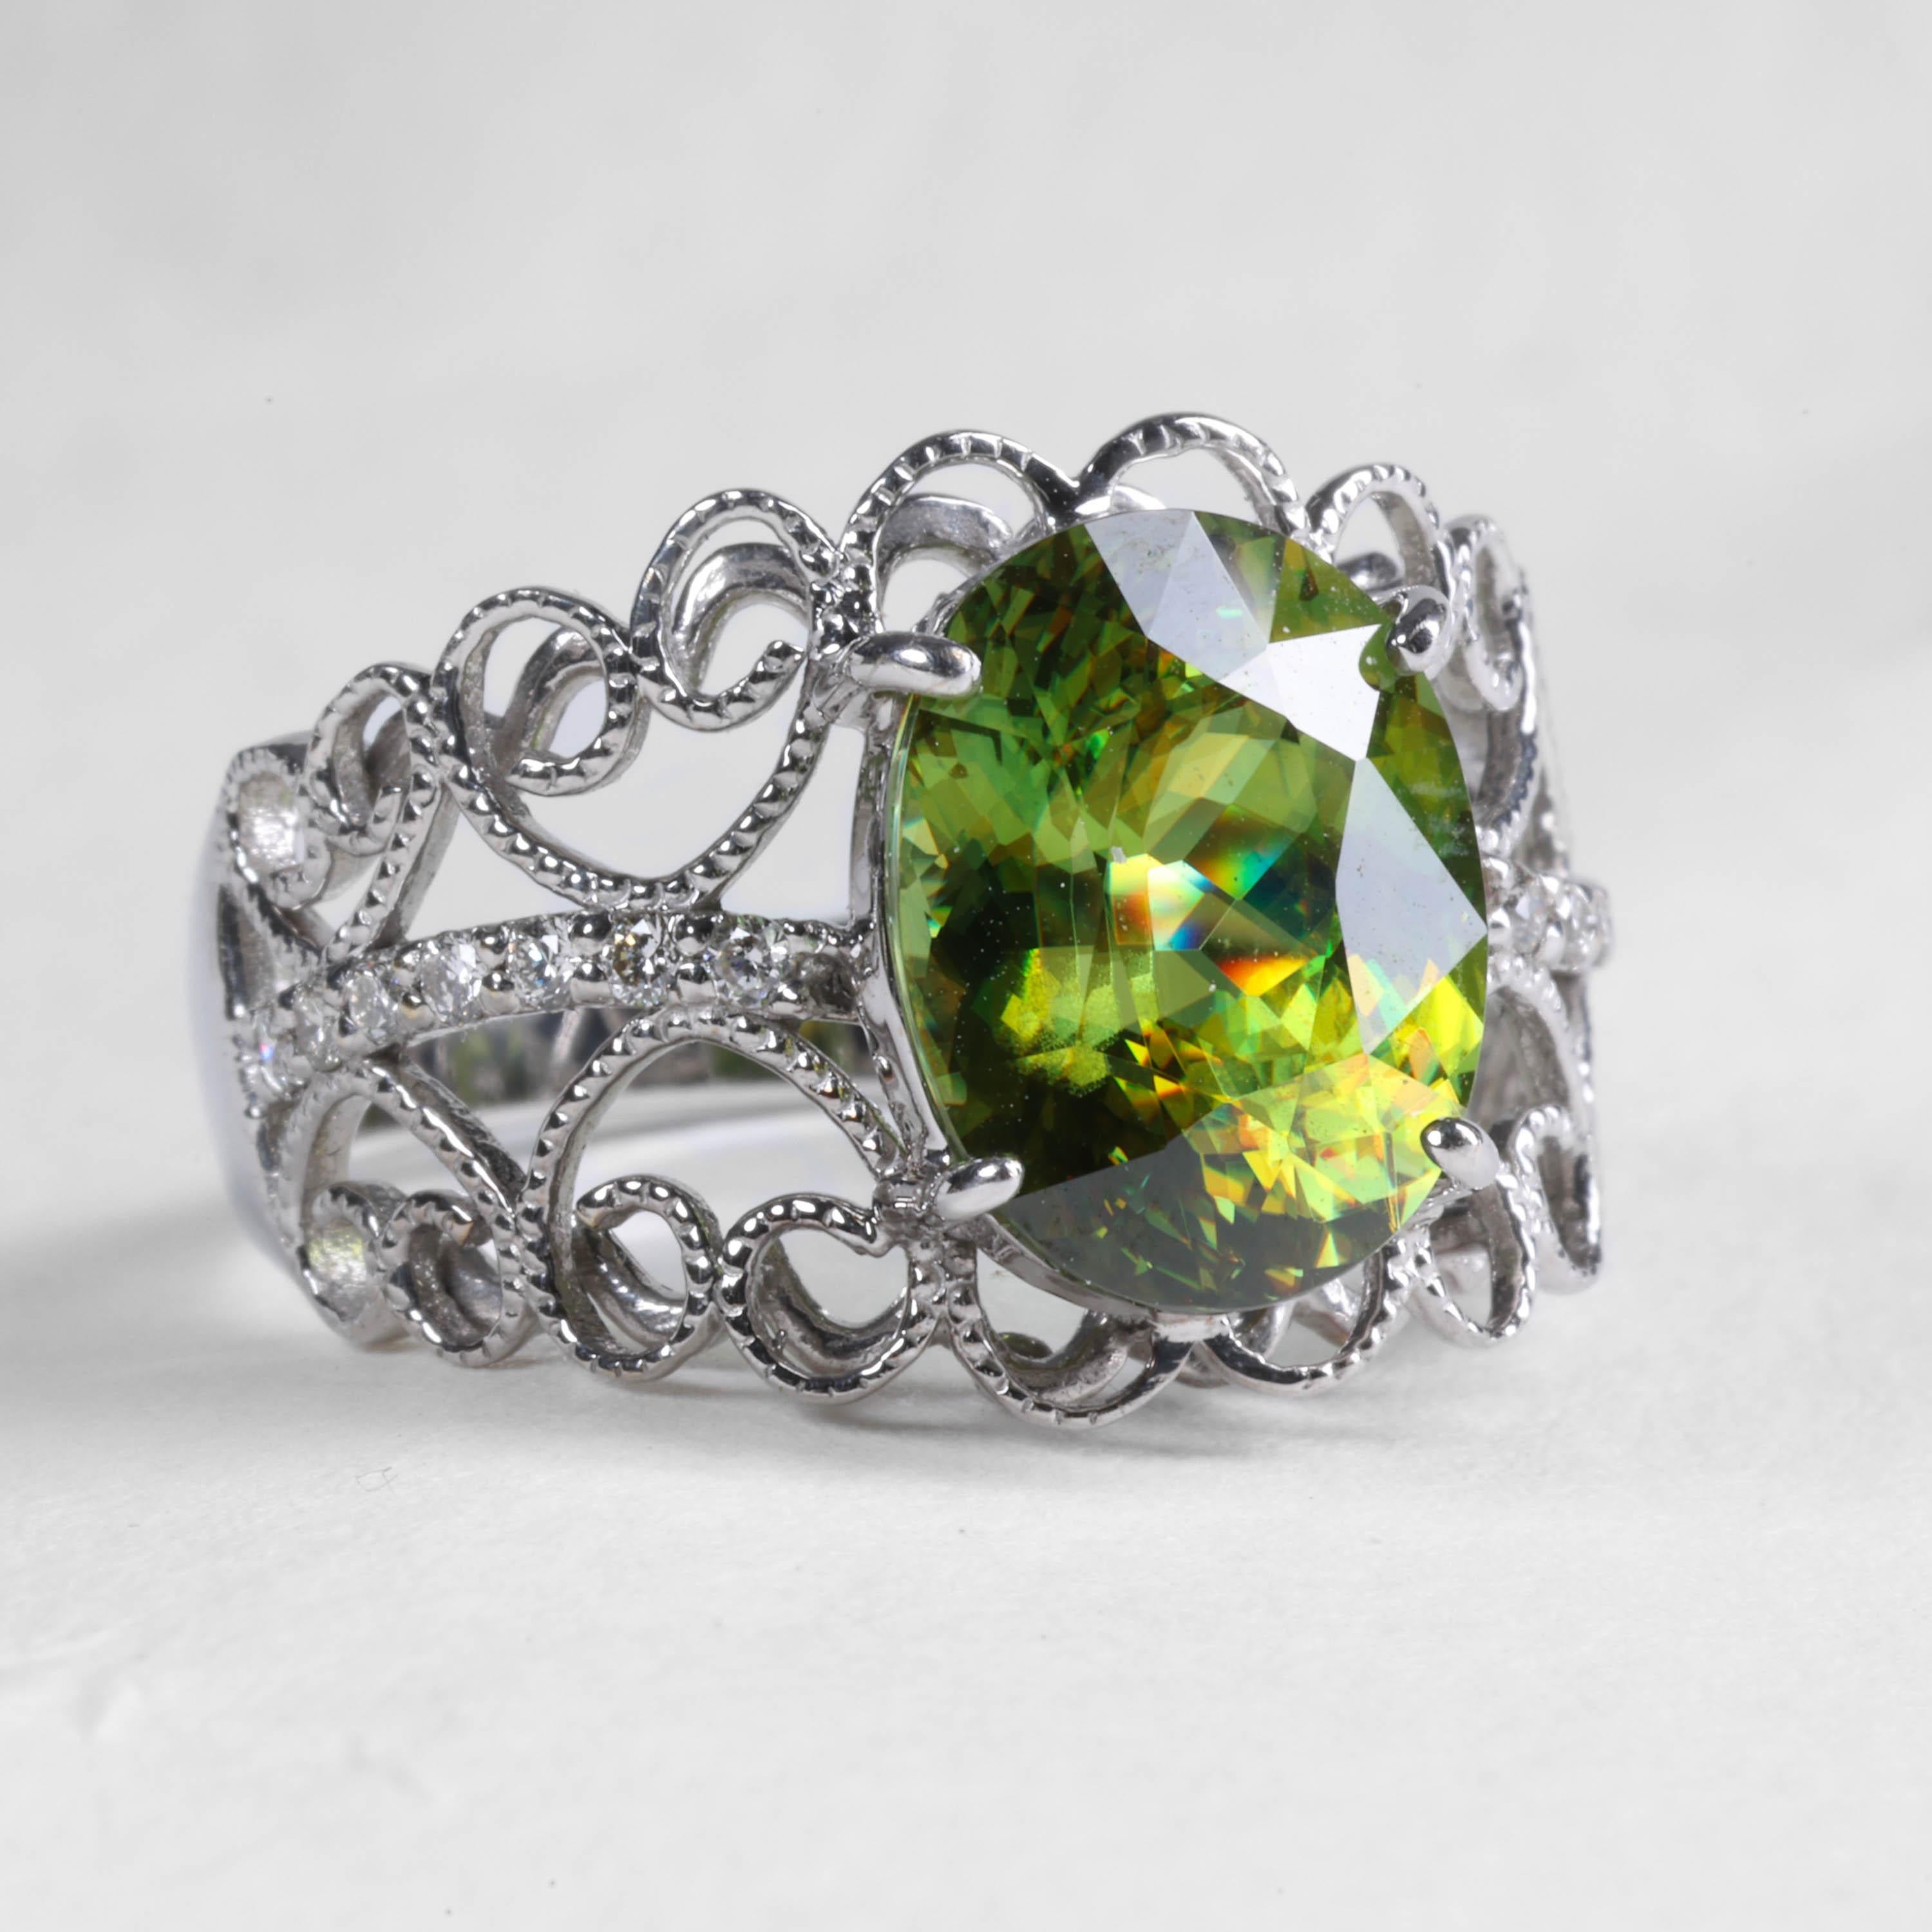 Oval Cut Sphene (Titanite) Exotic Gemstone Ring 4.05 Carats, Flashy & Fragile & Rare For Sale